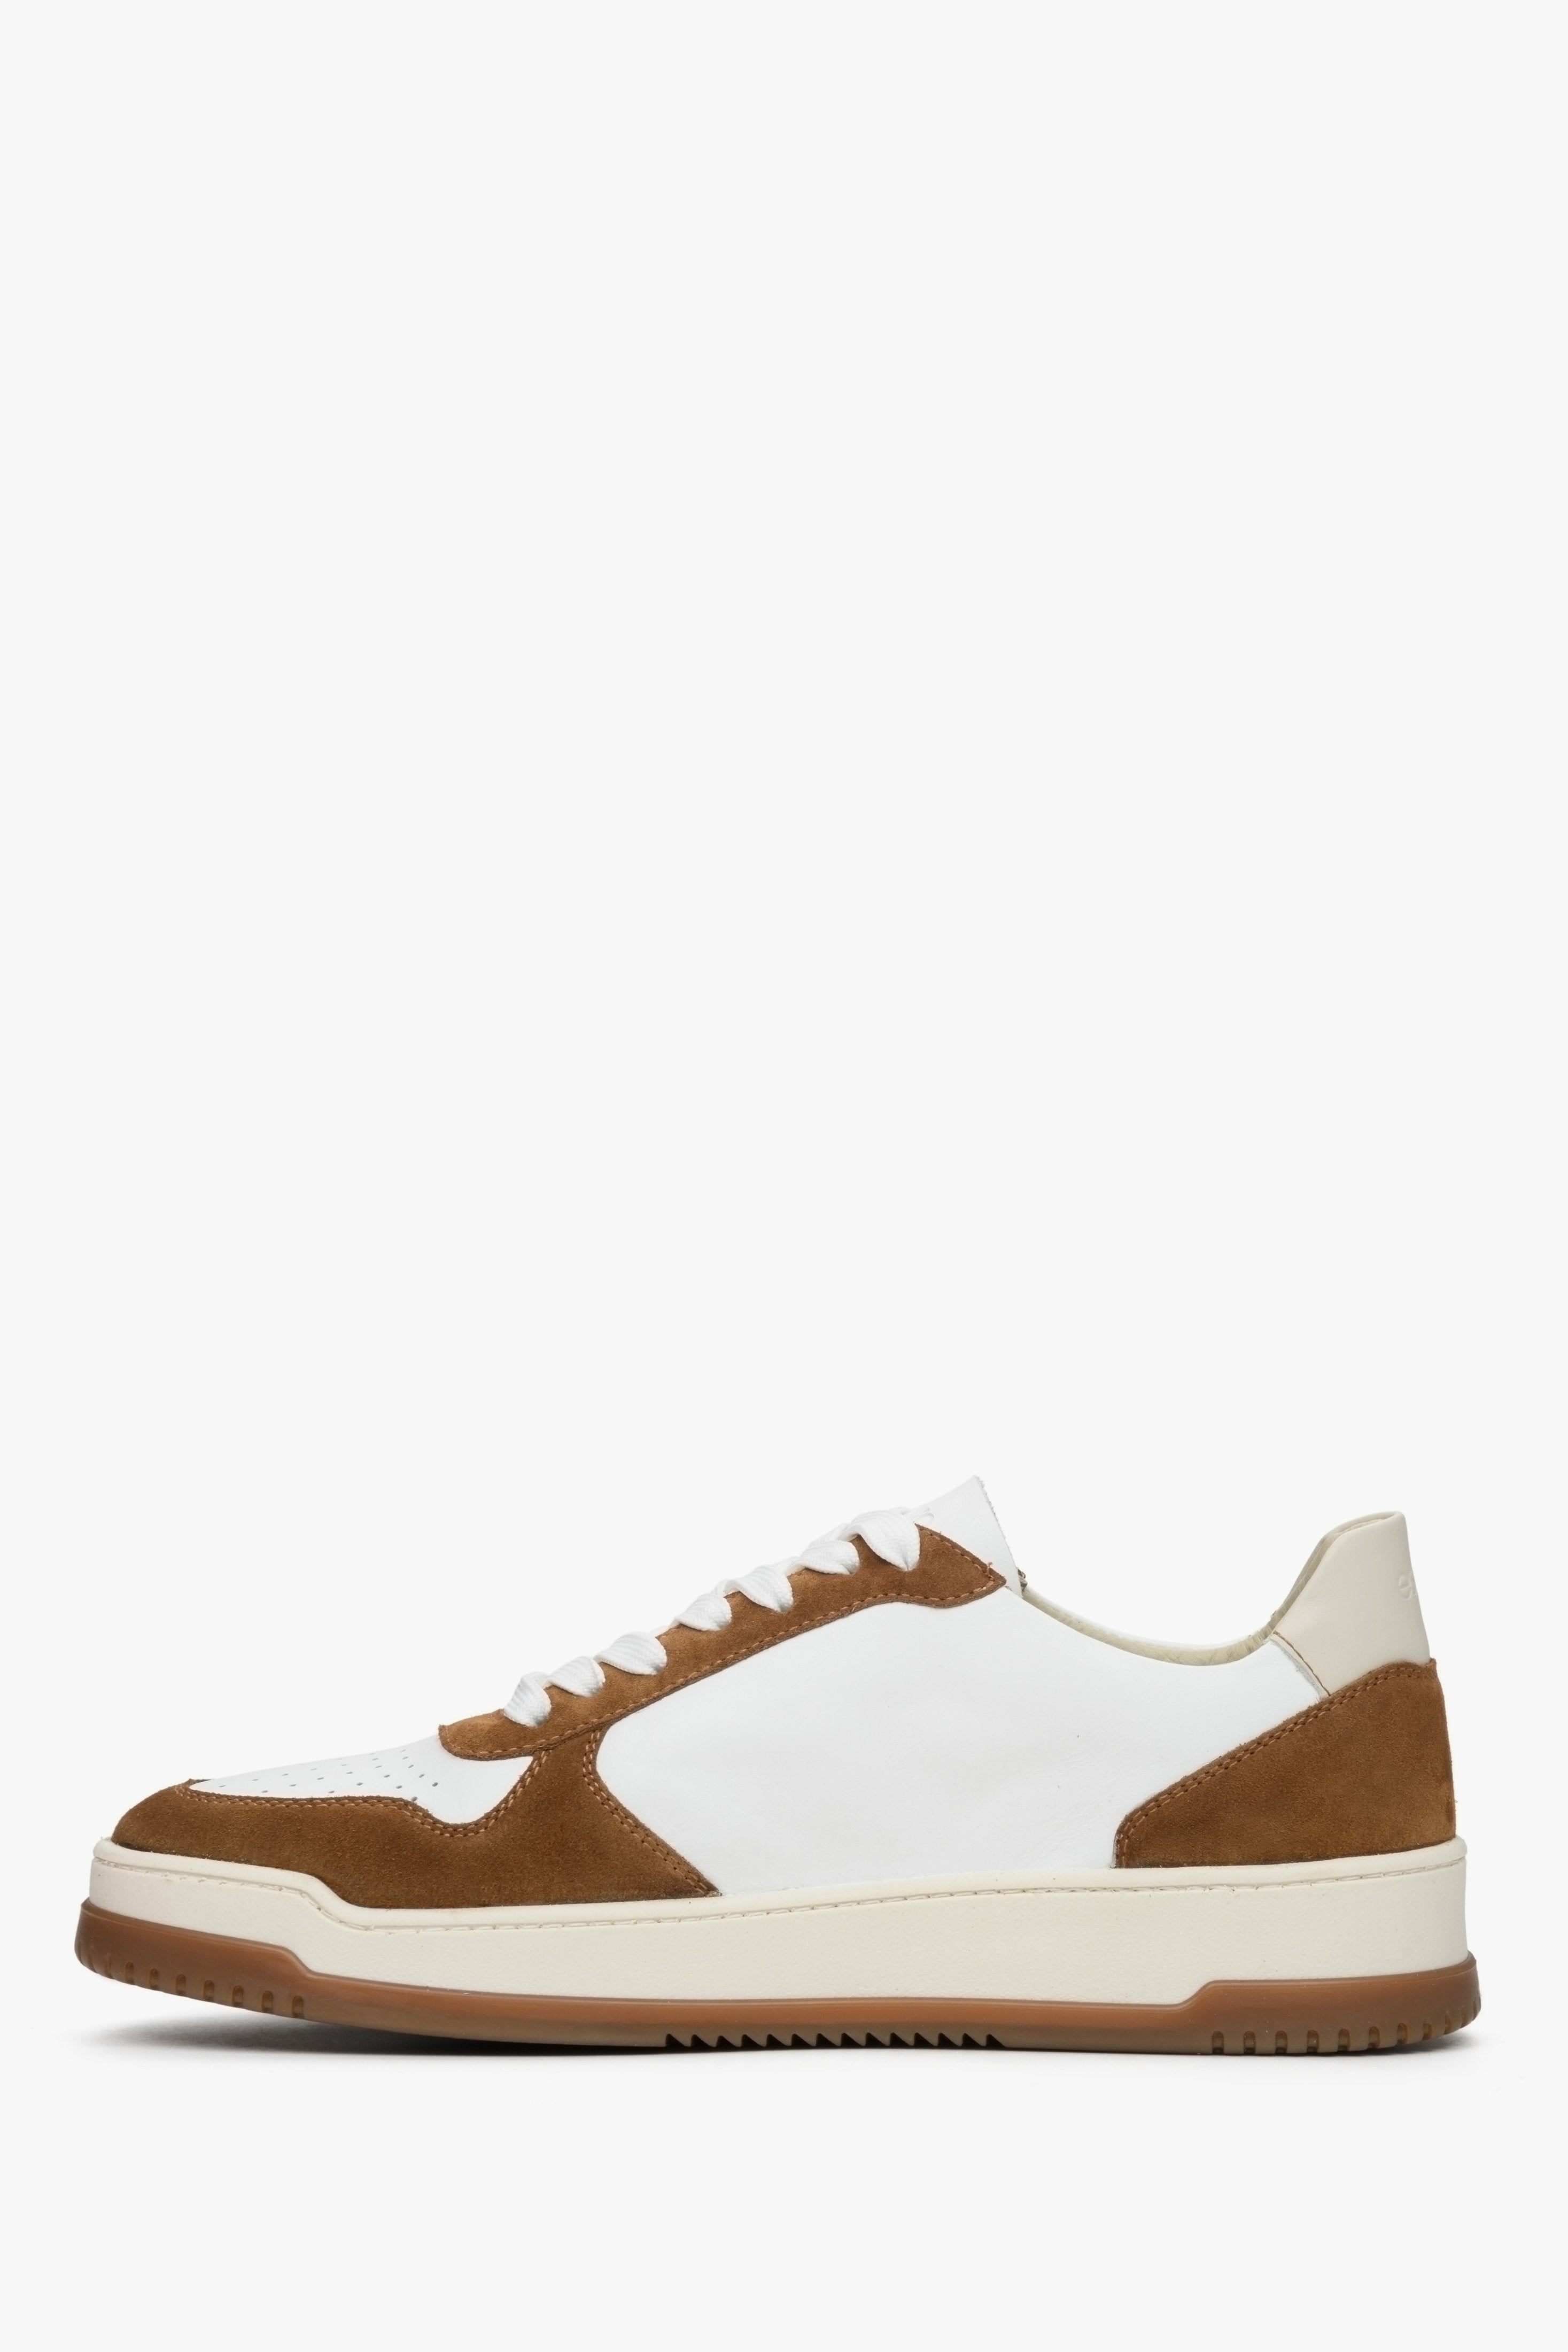 Men's white and brown suede and natural leather Estro sneakers - spring shoe profile.